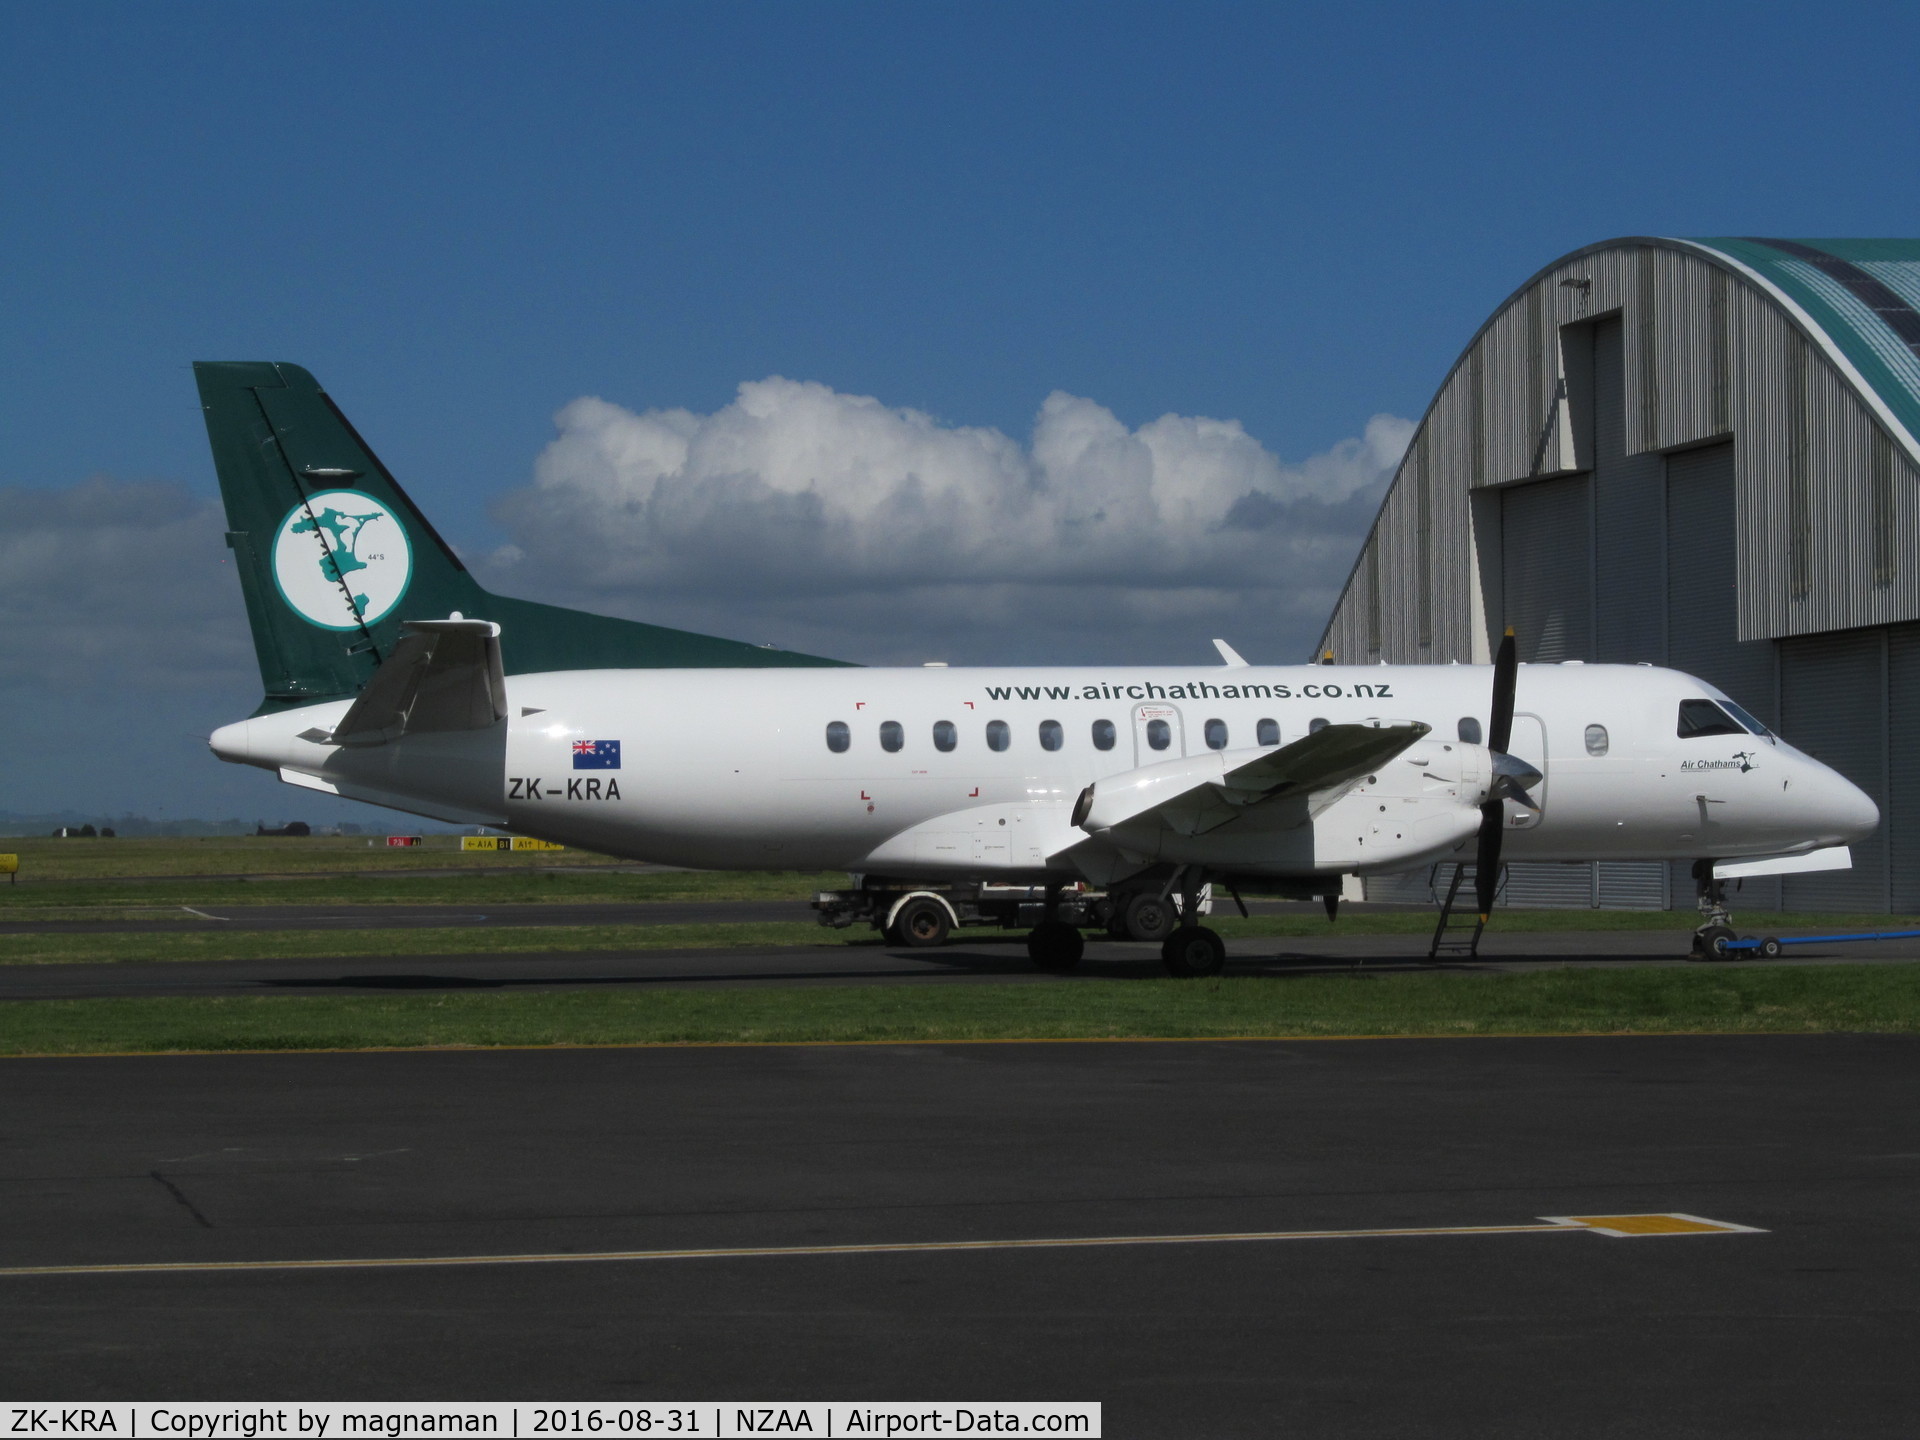 ZK-KRA, 1986 Saab SF340A C/N 340A-065, Once of Kiwi Regional Airlines (did not last long) now with expanding Air Chathams!